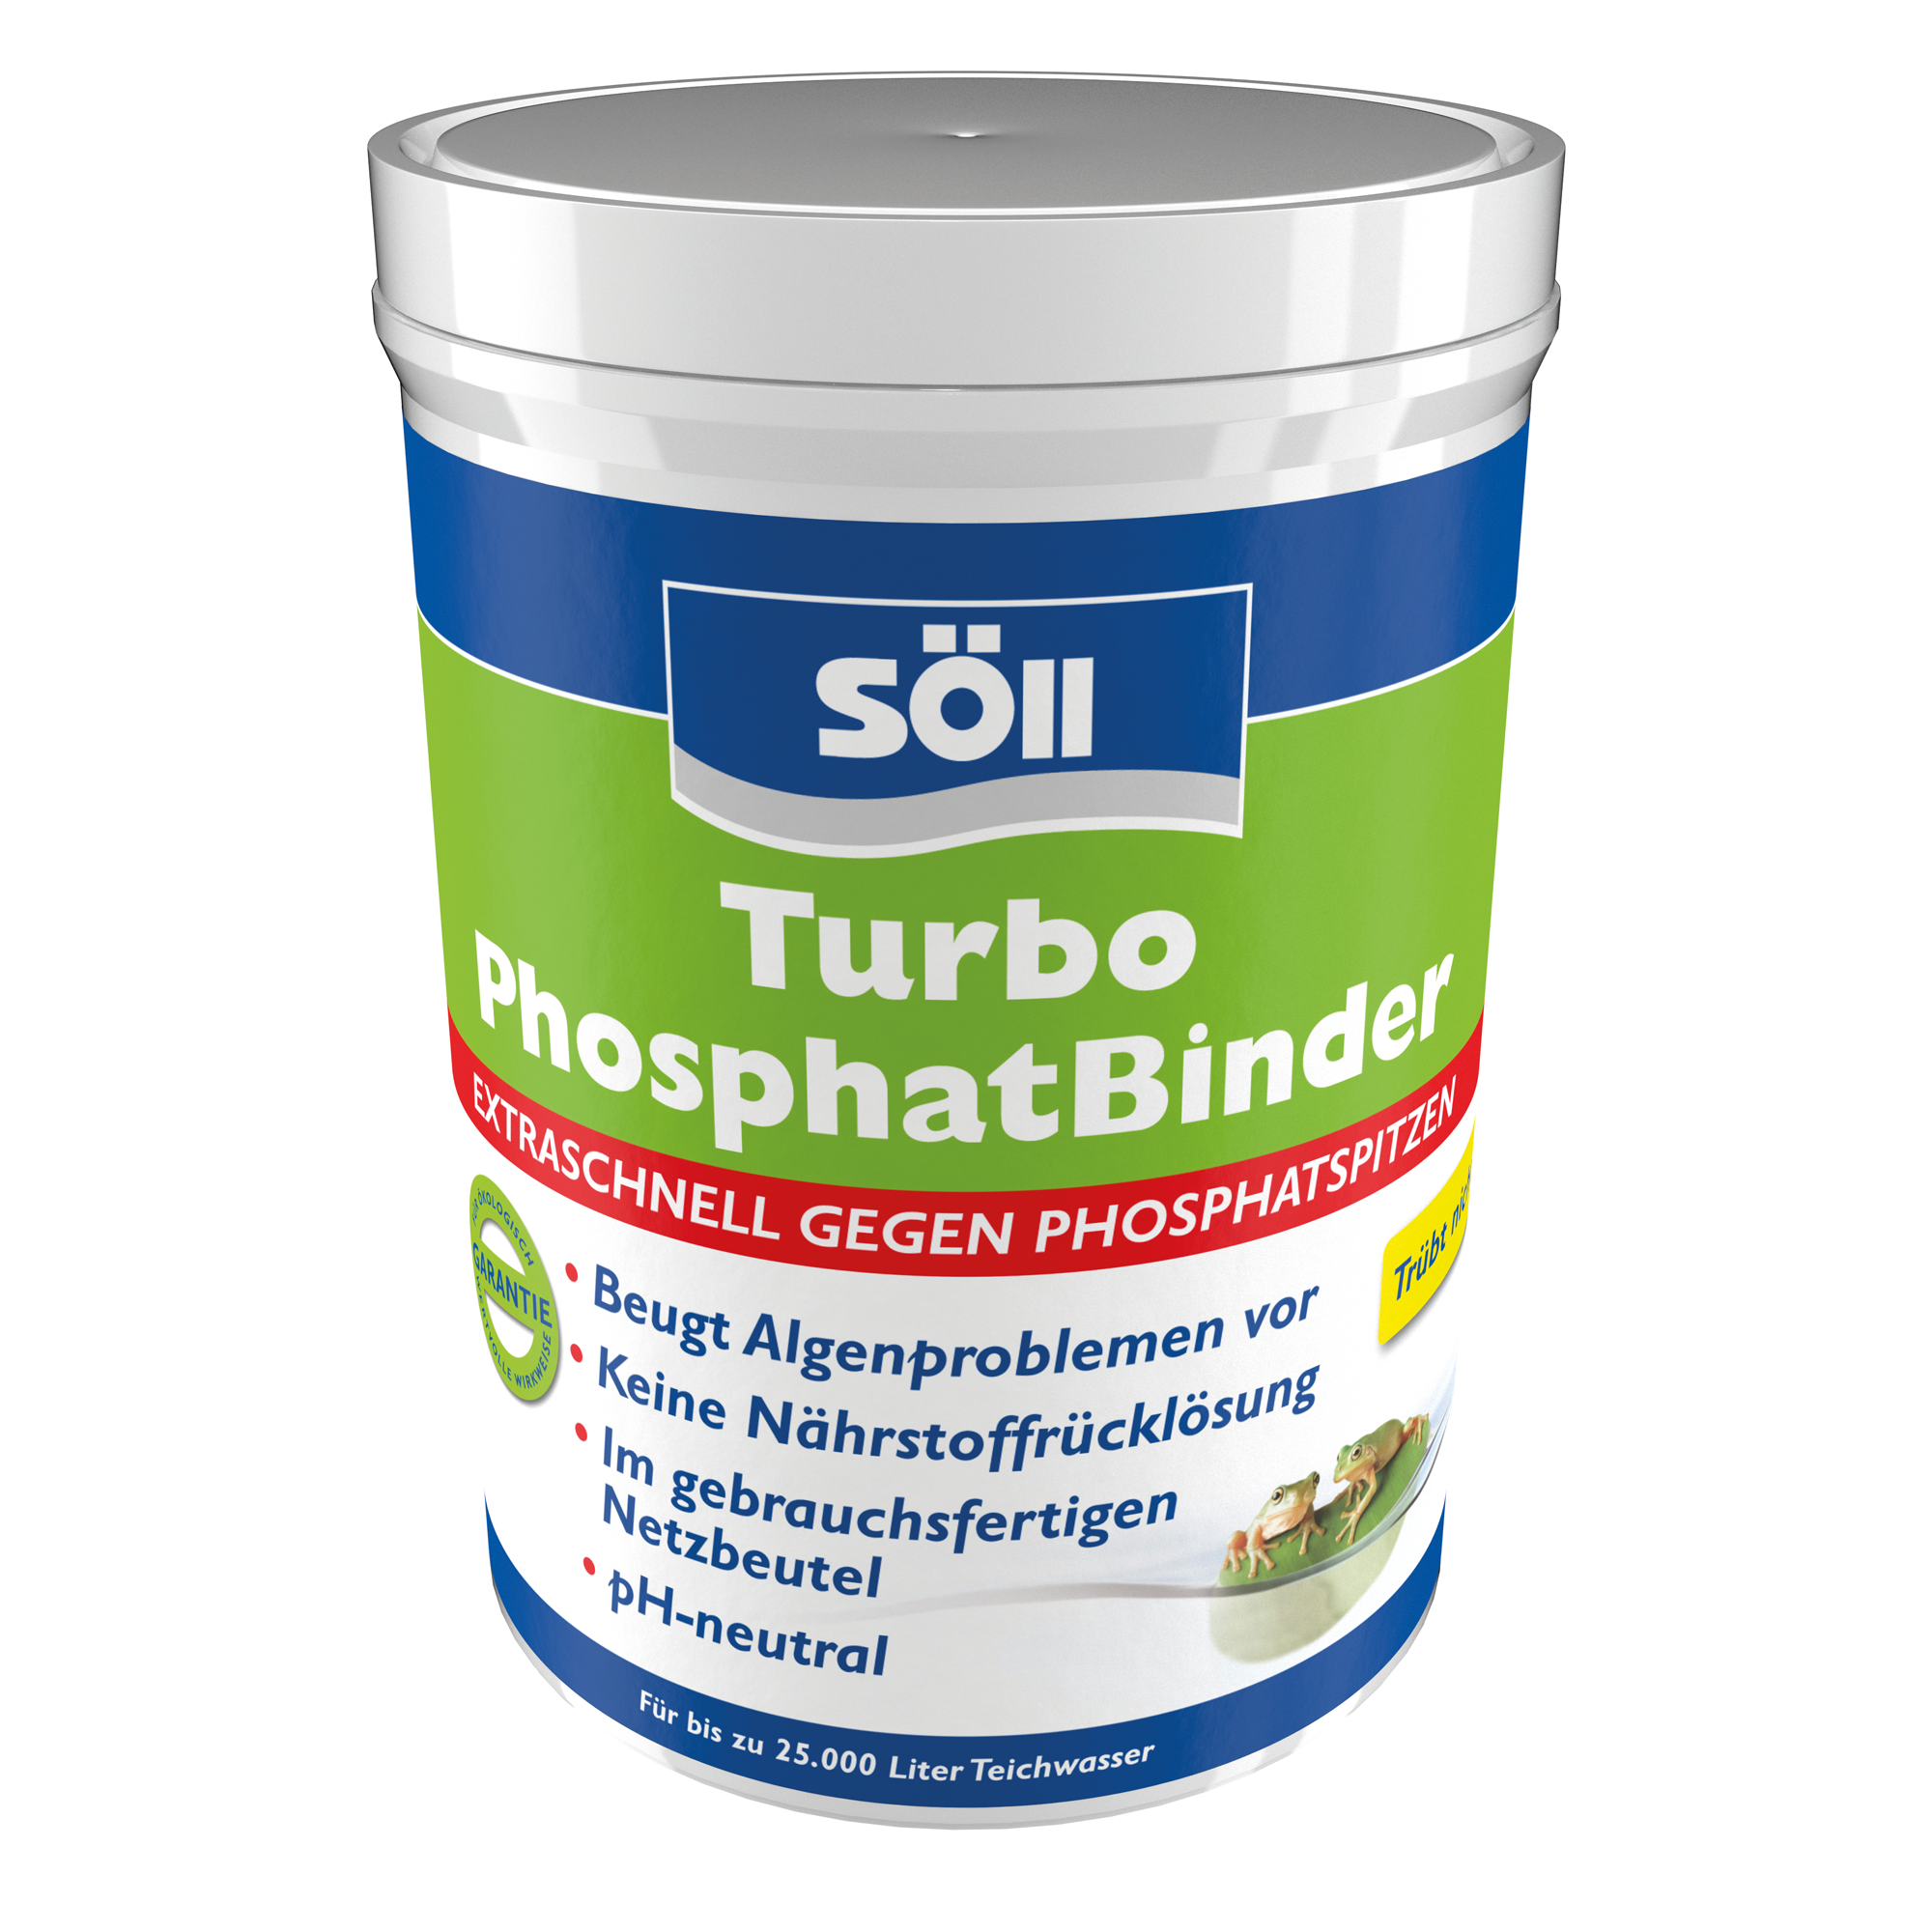 Turbo-Phosphatbinder 600 g + product picture